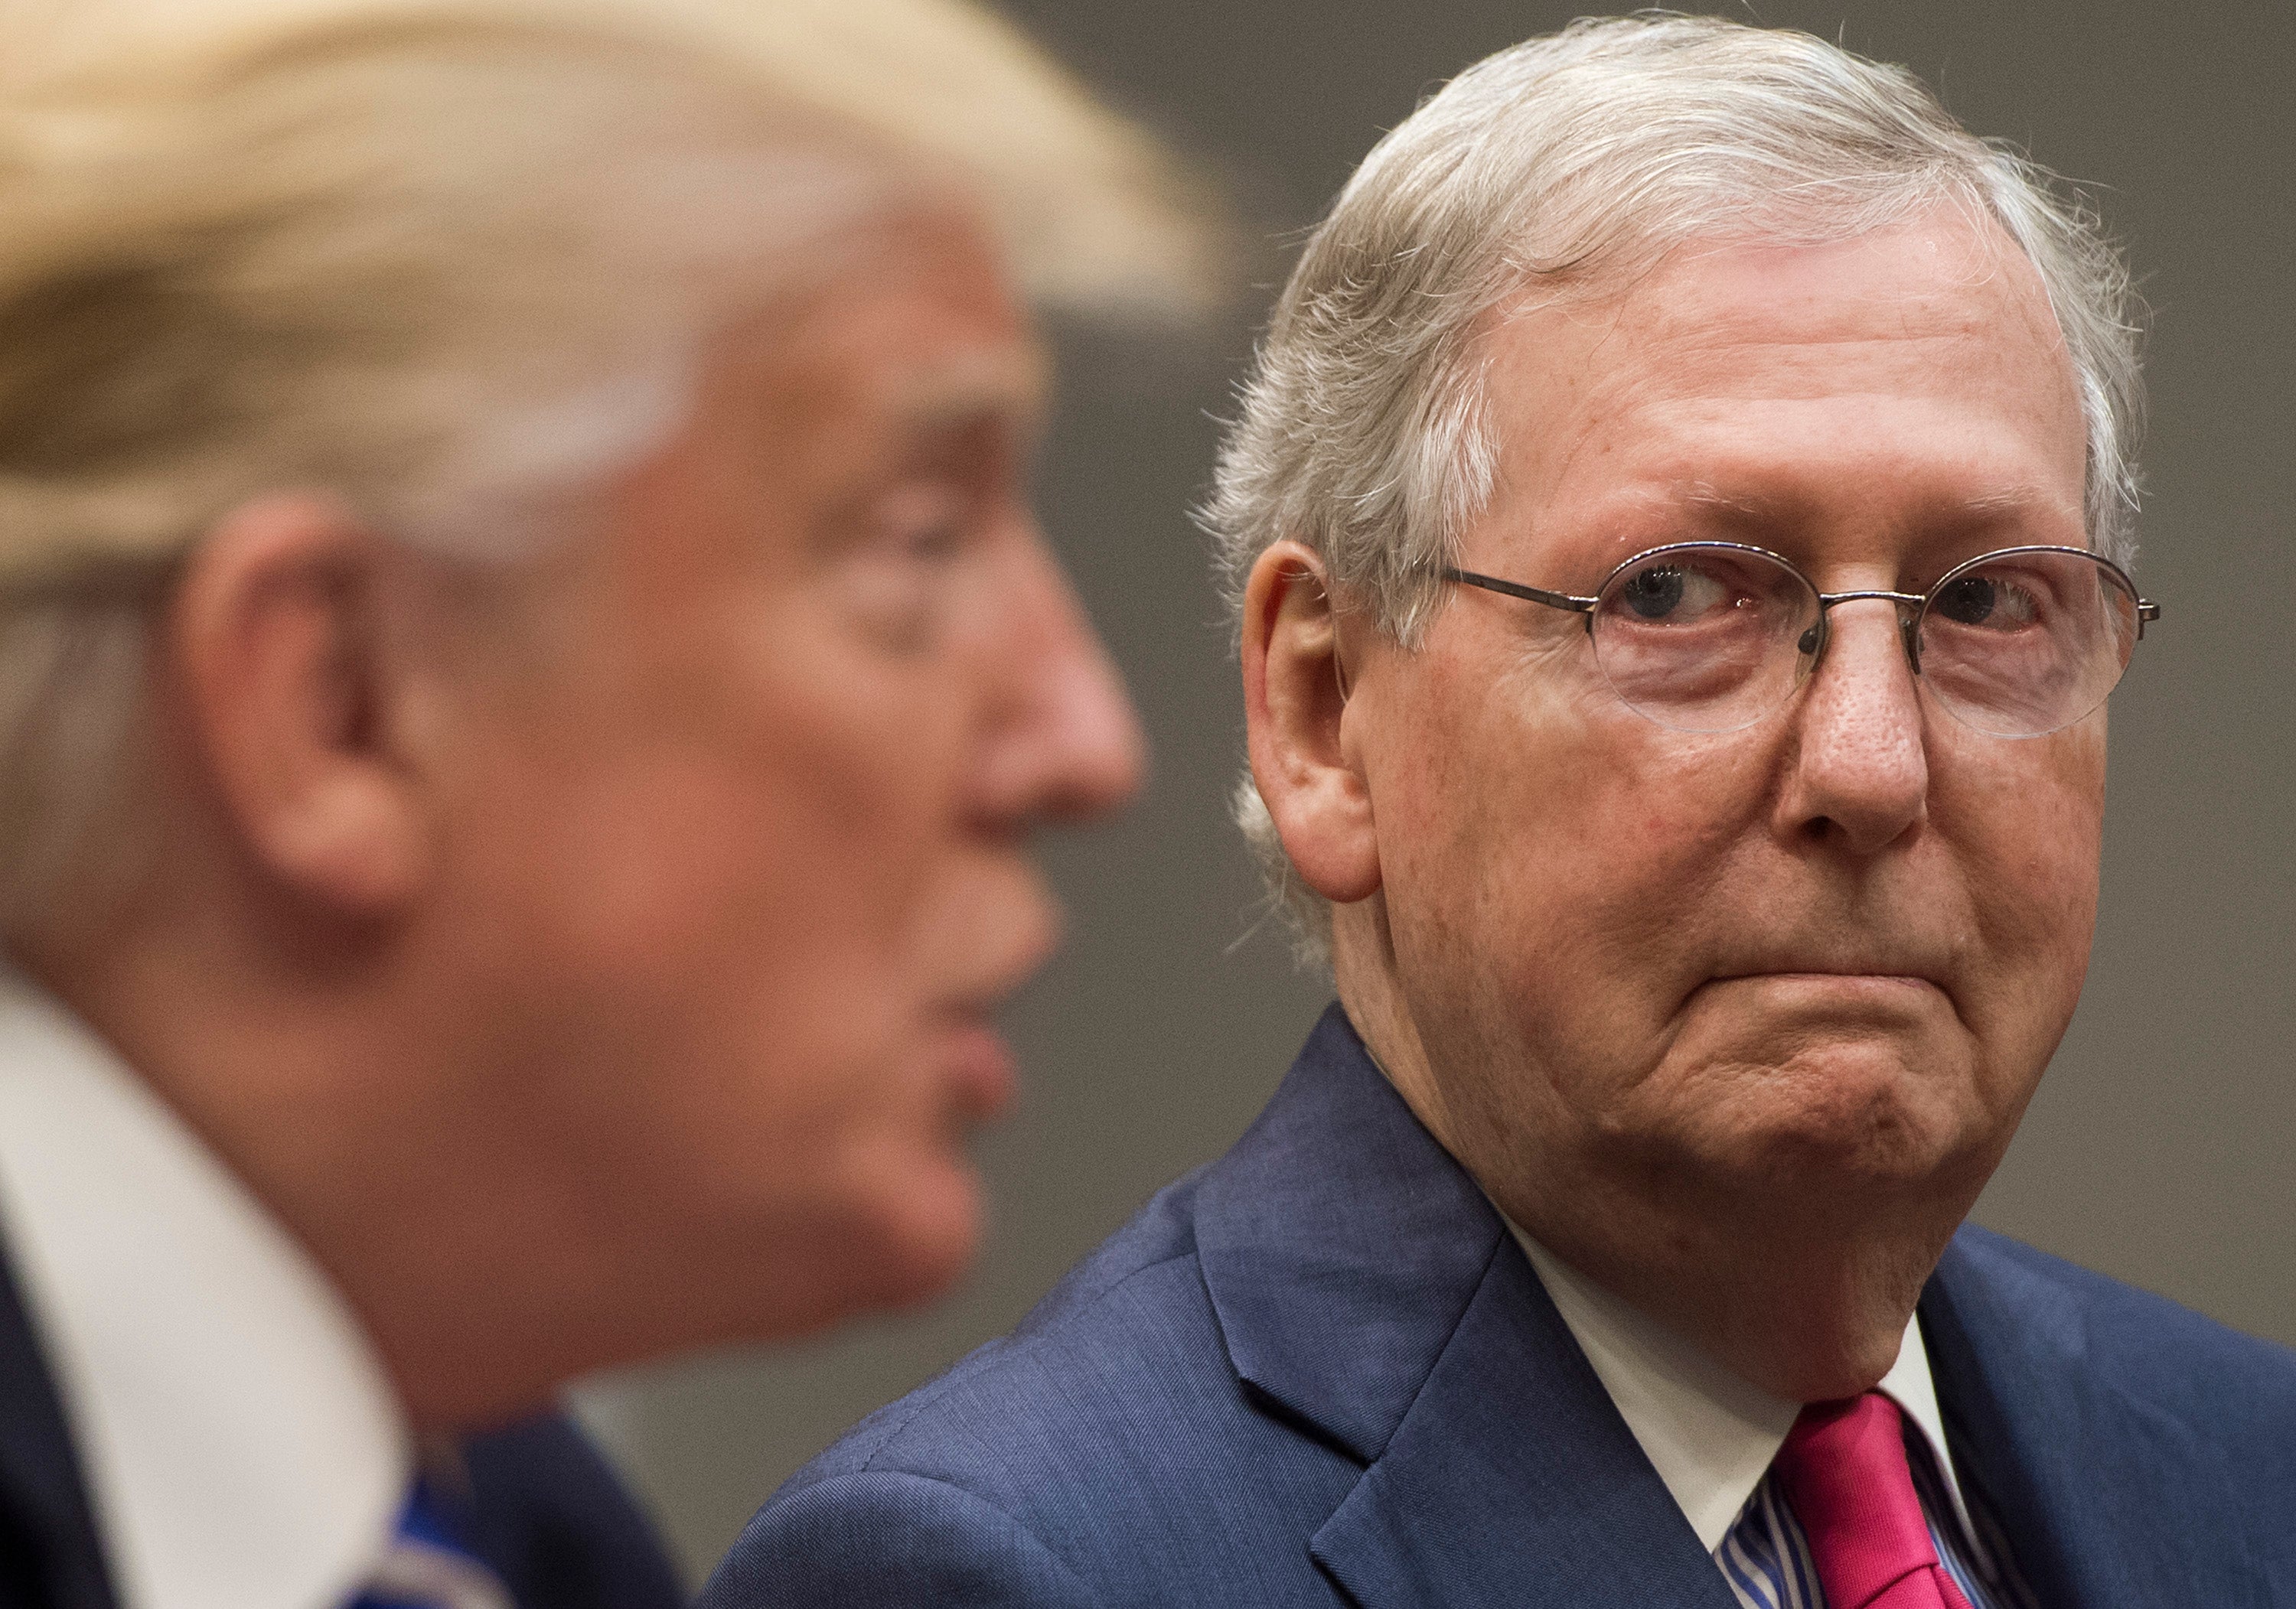 Donald Trump slammed former ally Mitch McConnell, saying that the recent bipartisan infrastructure shows the GOP needs ‘someone better.’